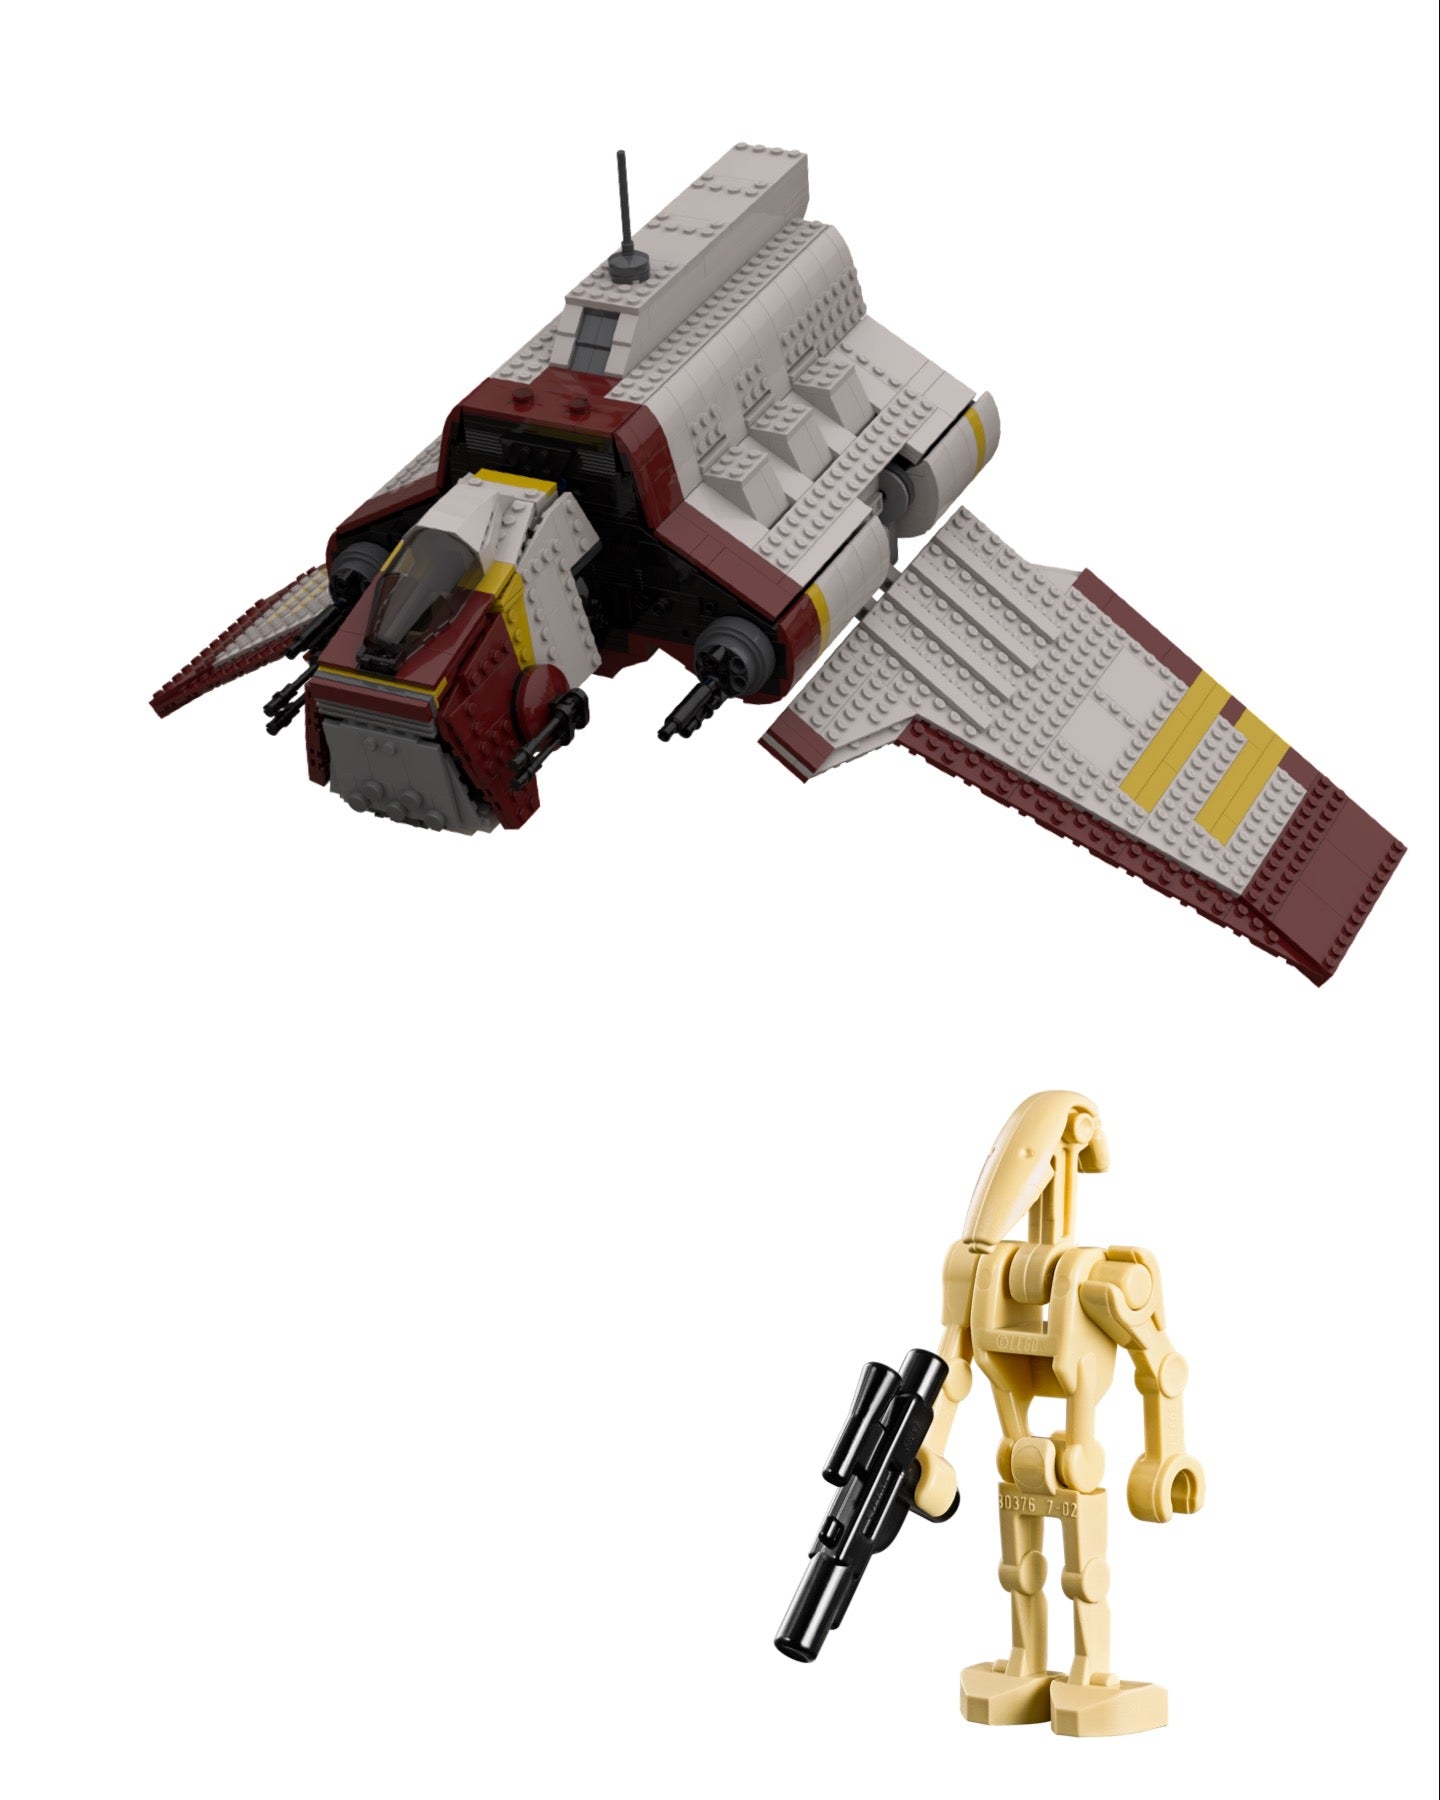 FREE REPUBLIC ATTACK SHUTTLE OR BATTLE DROID!